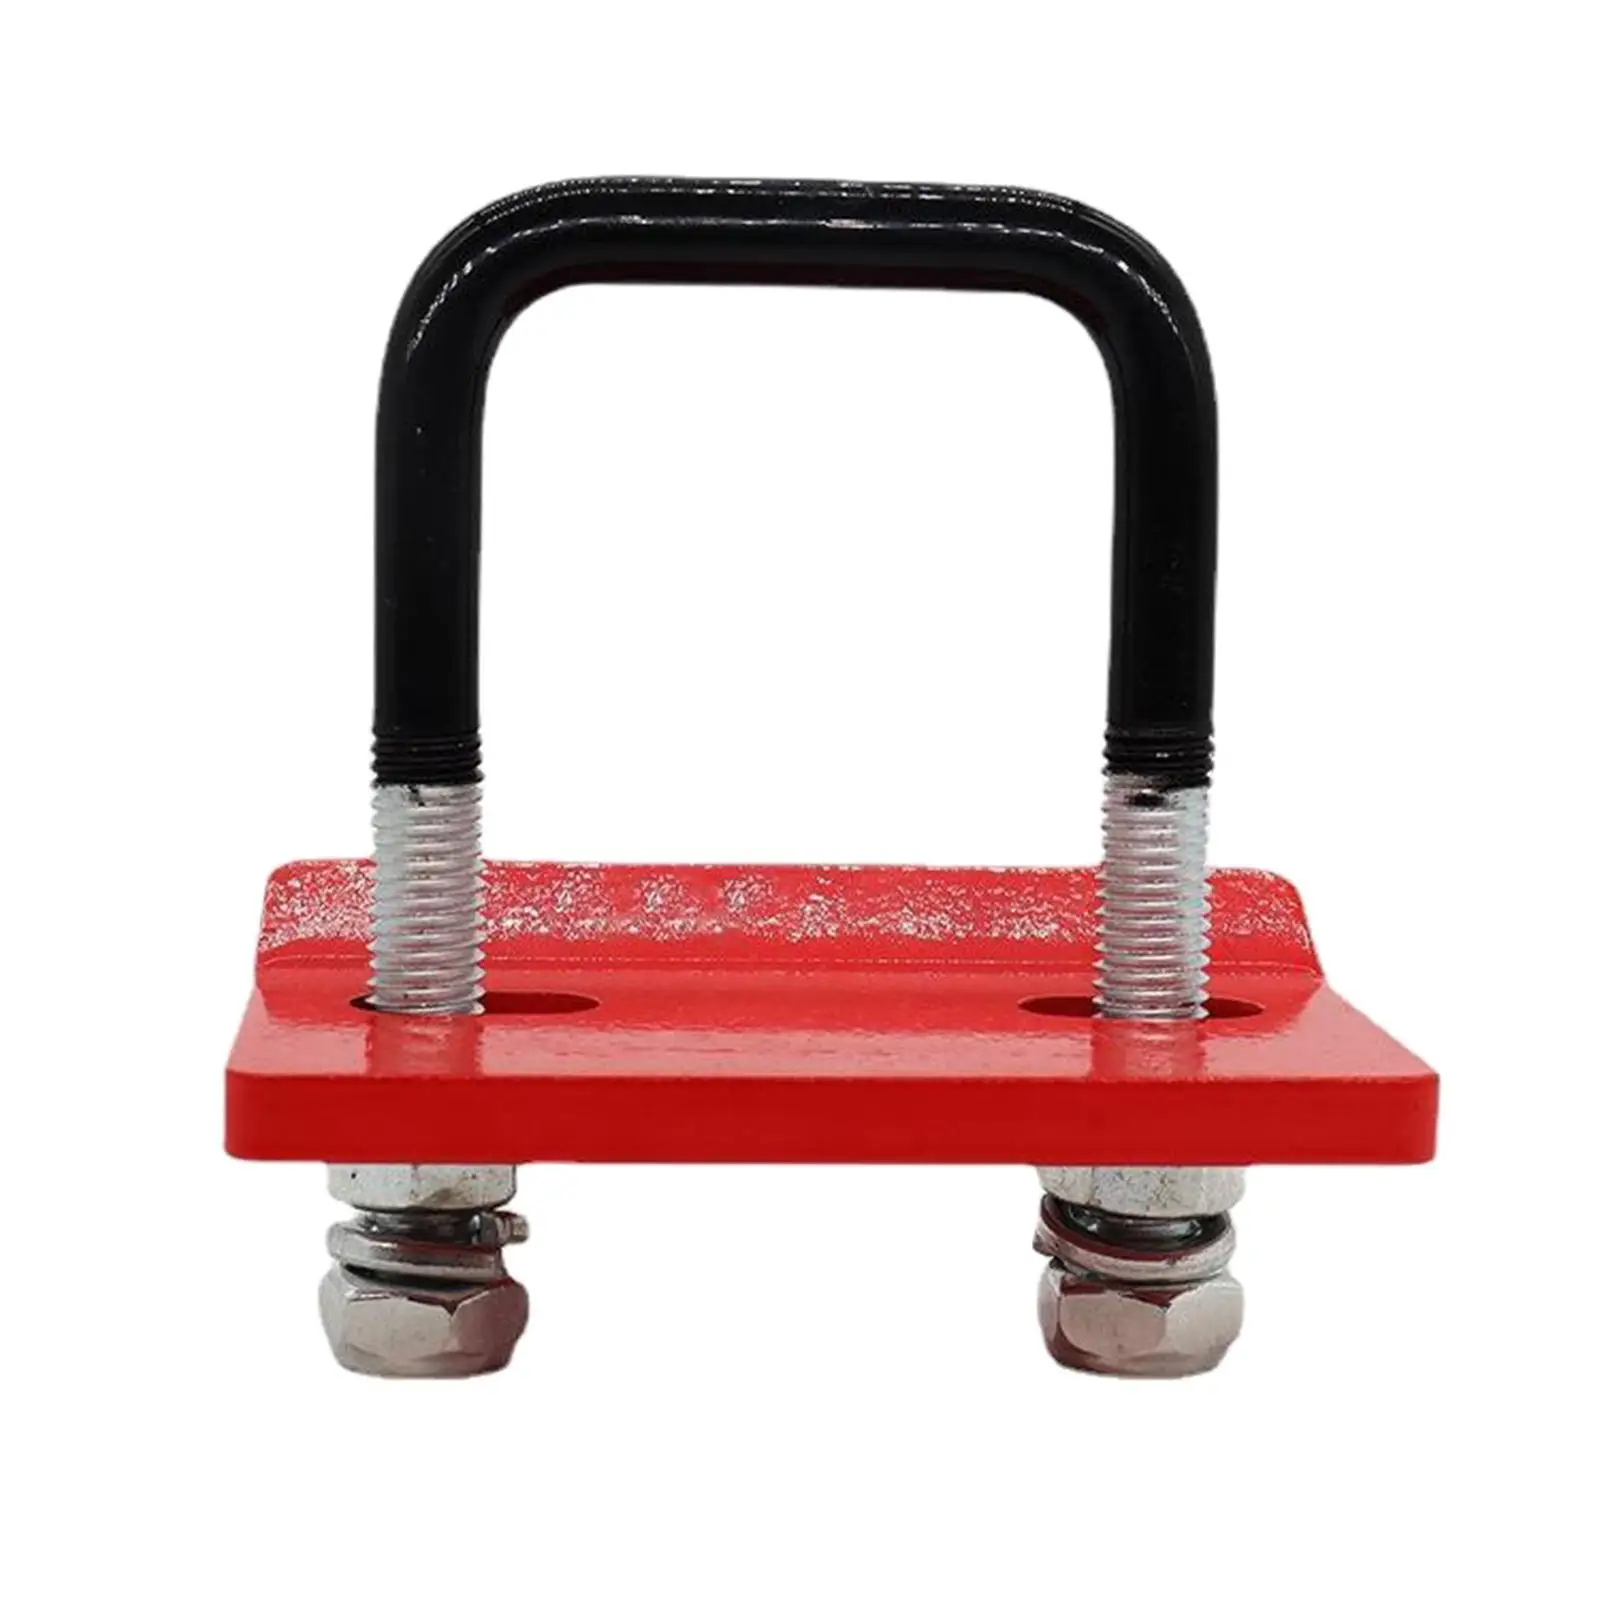 Alloy Steel Hitch Tightener Transportation Accessories Anti Rattle Stabilizer for Bike Rack Hitch Tray Boat Trailer Ball Mount